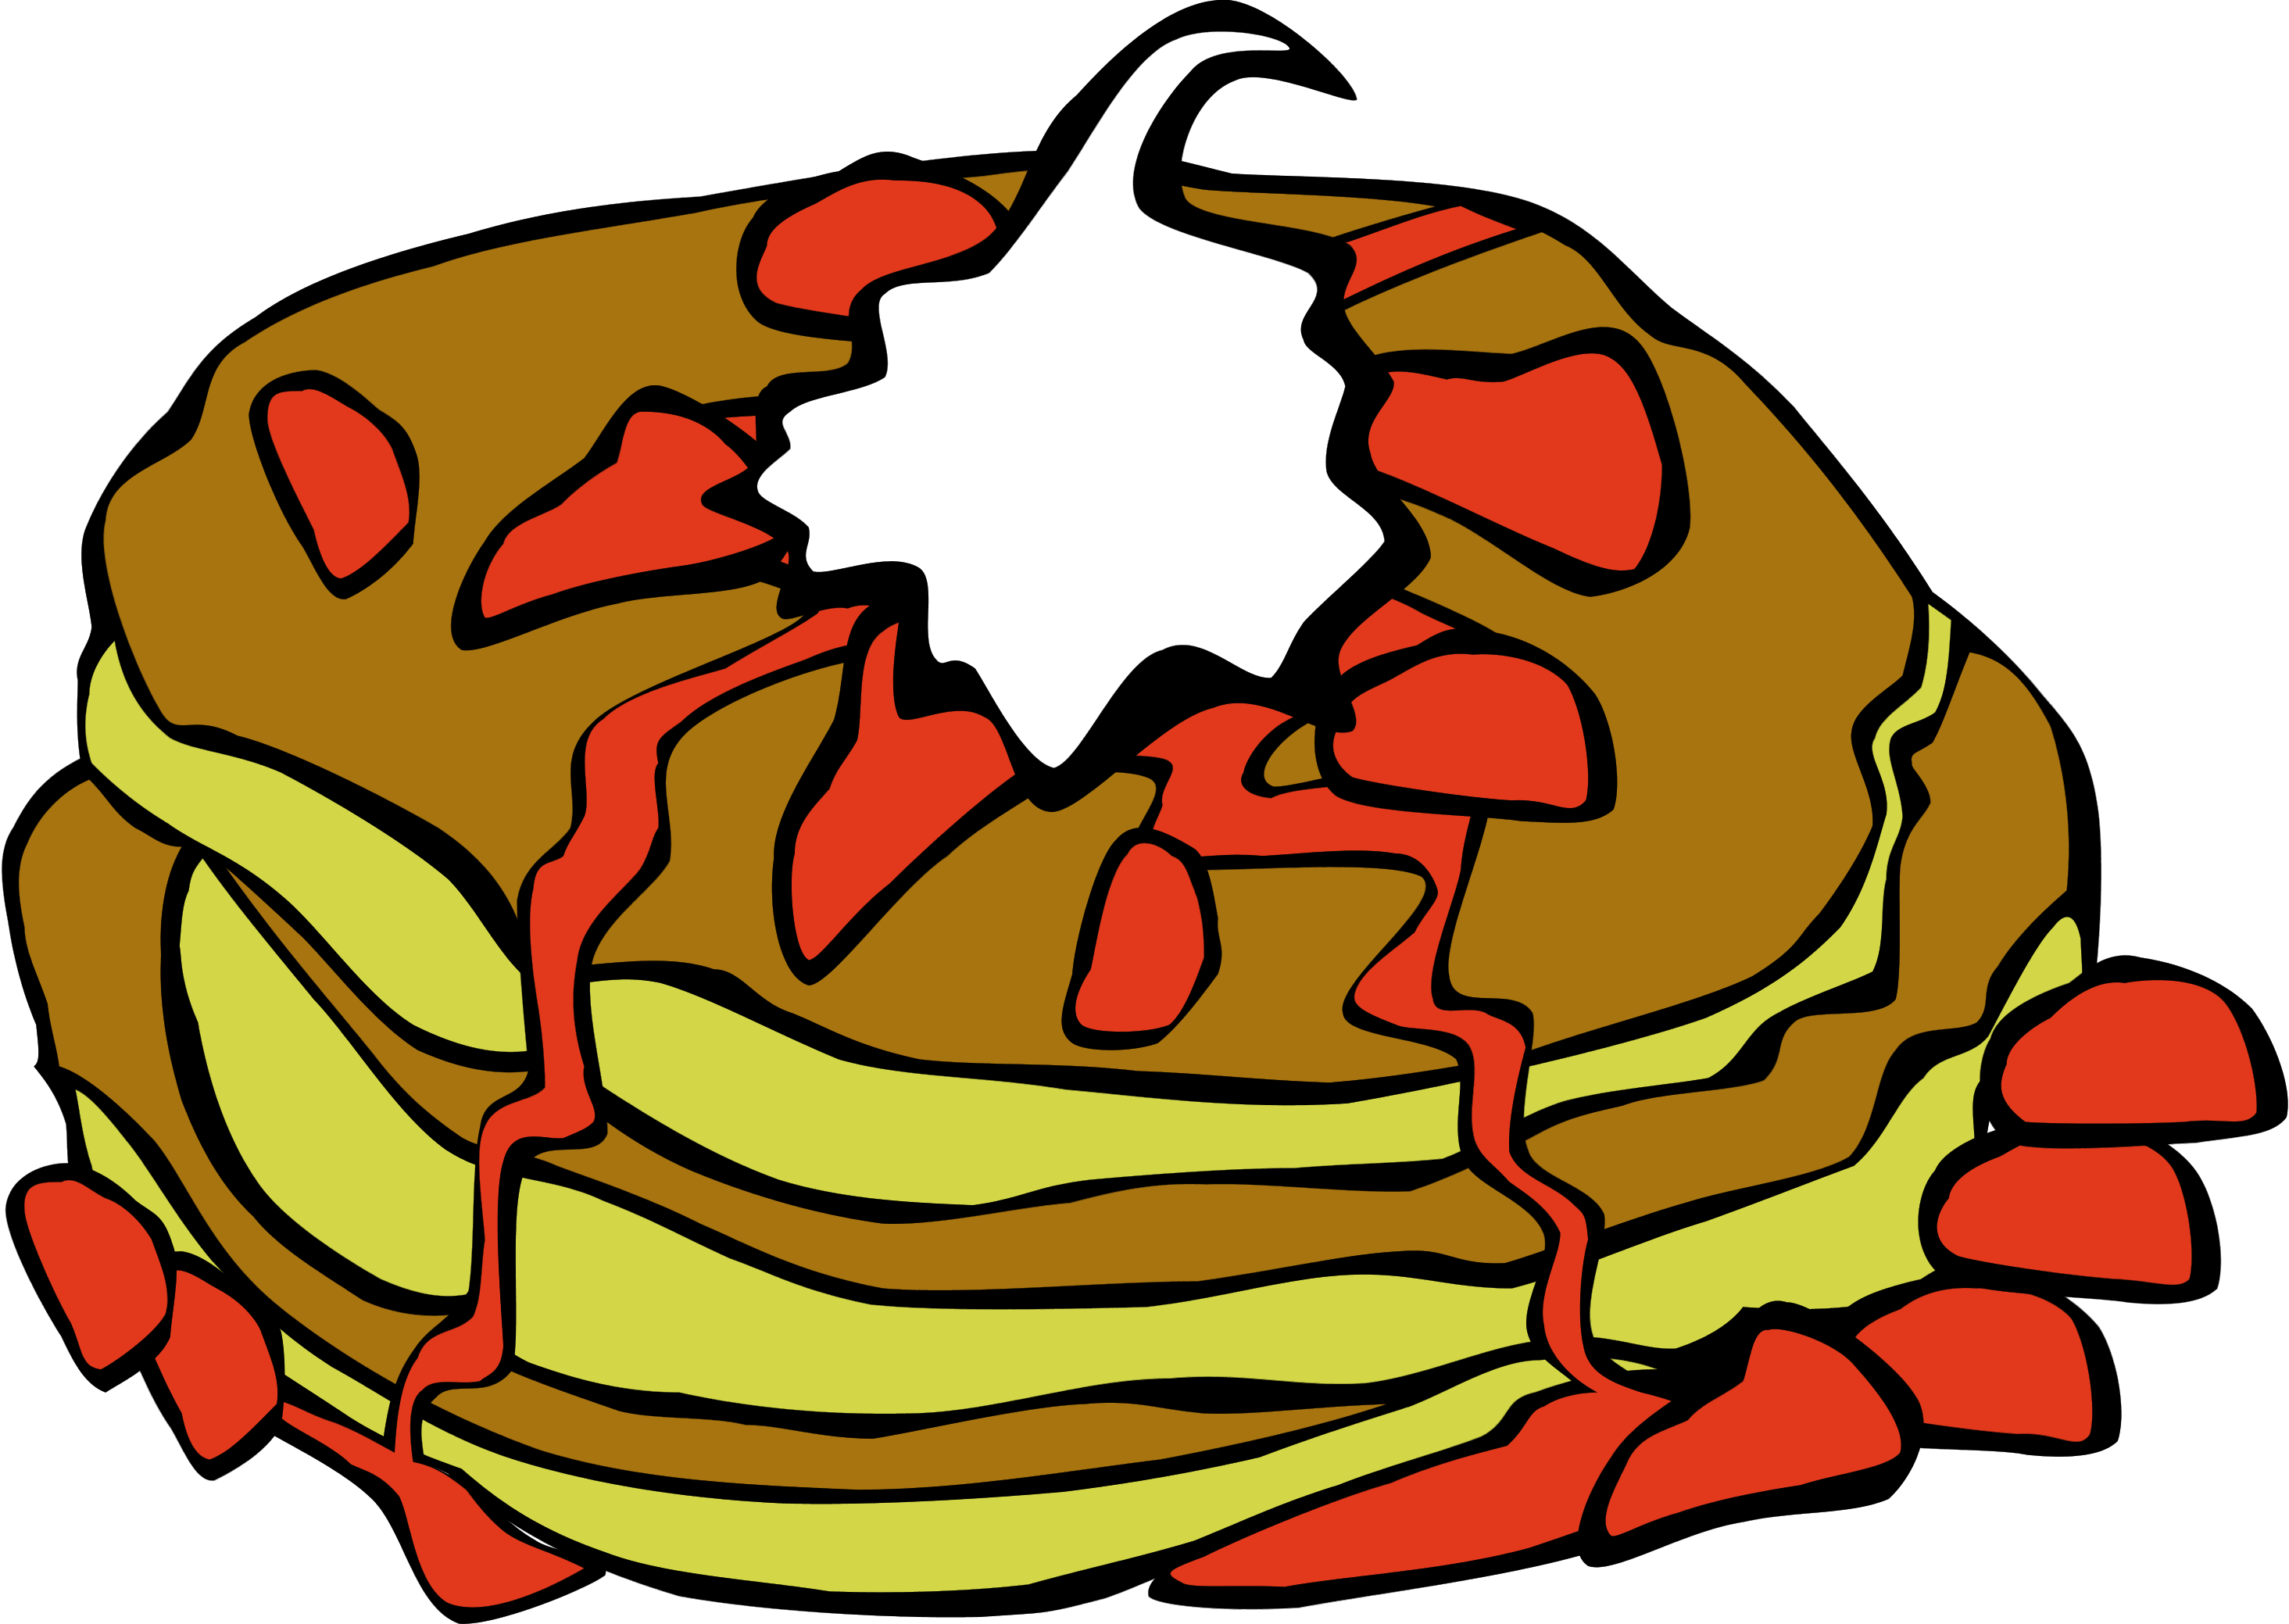 Dishes clipart bhojan. Carbohydrates group pancake carbohydrate